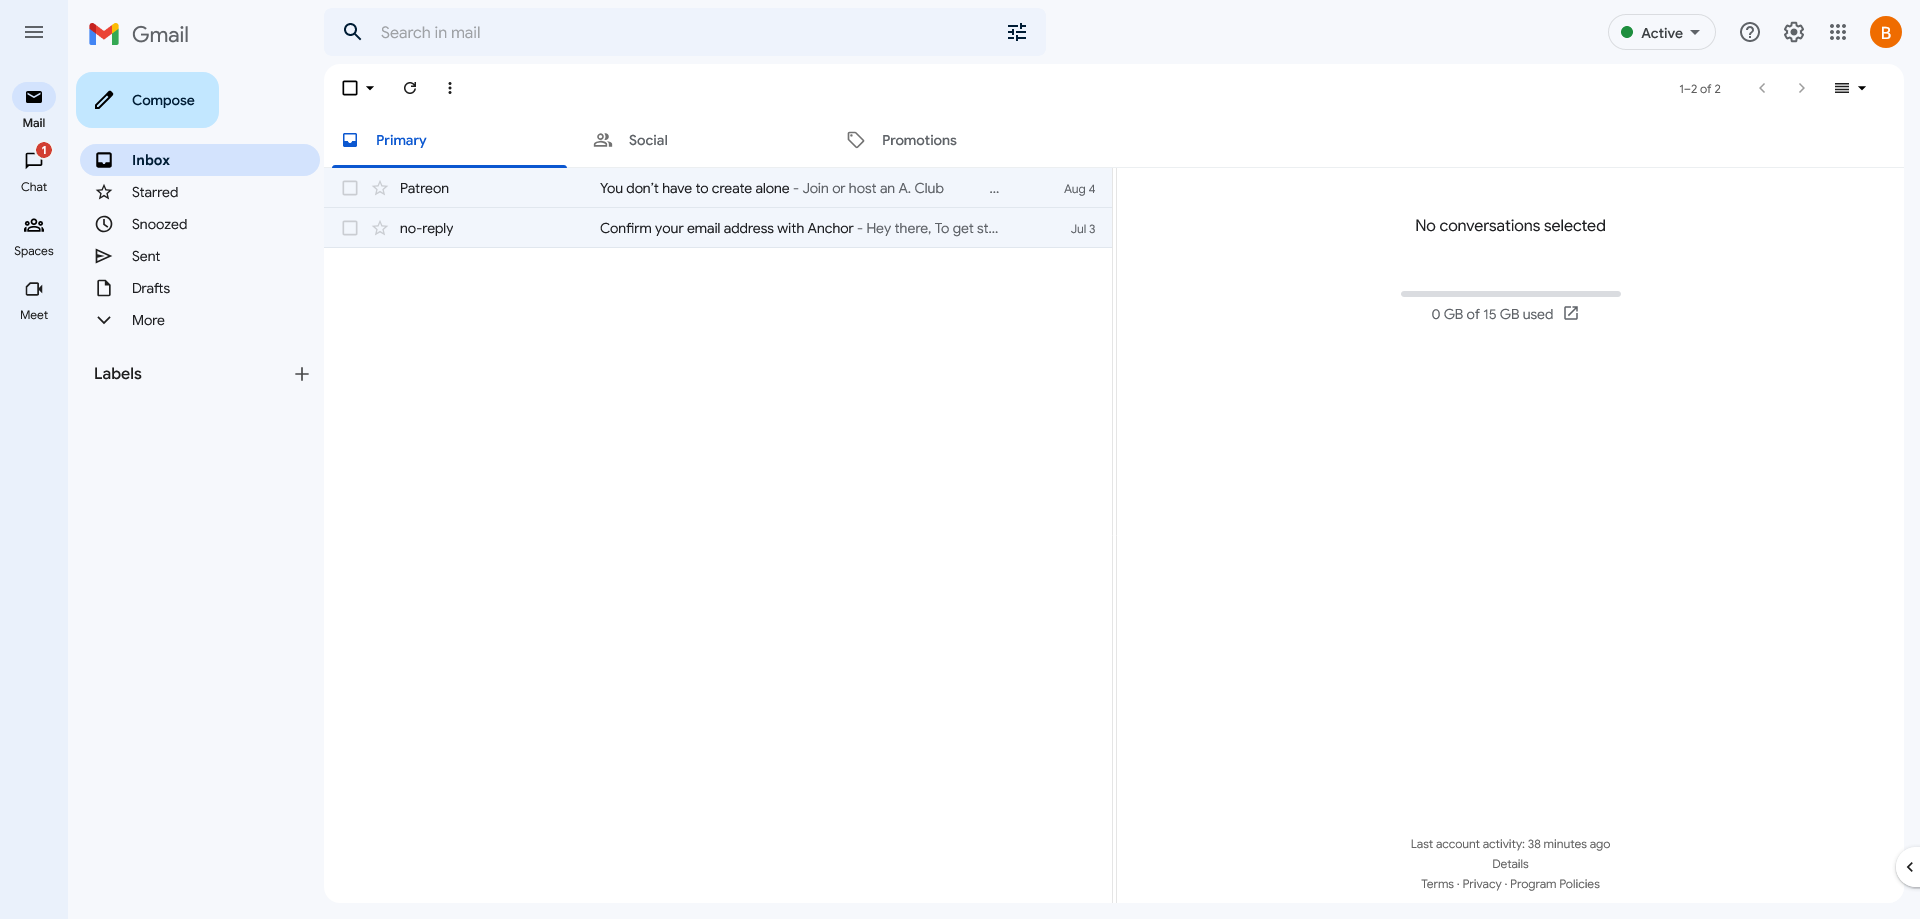 Chat and Meet on in Gmail's new 2022 design